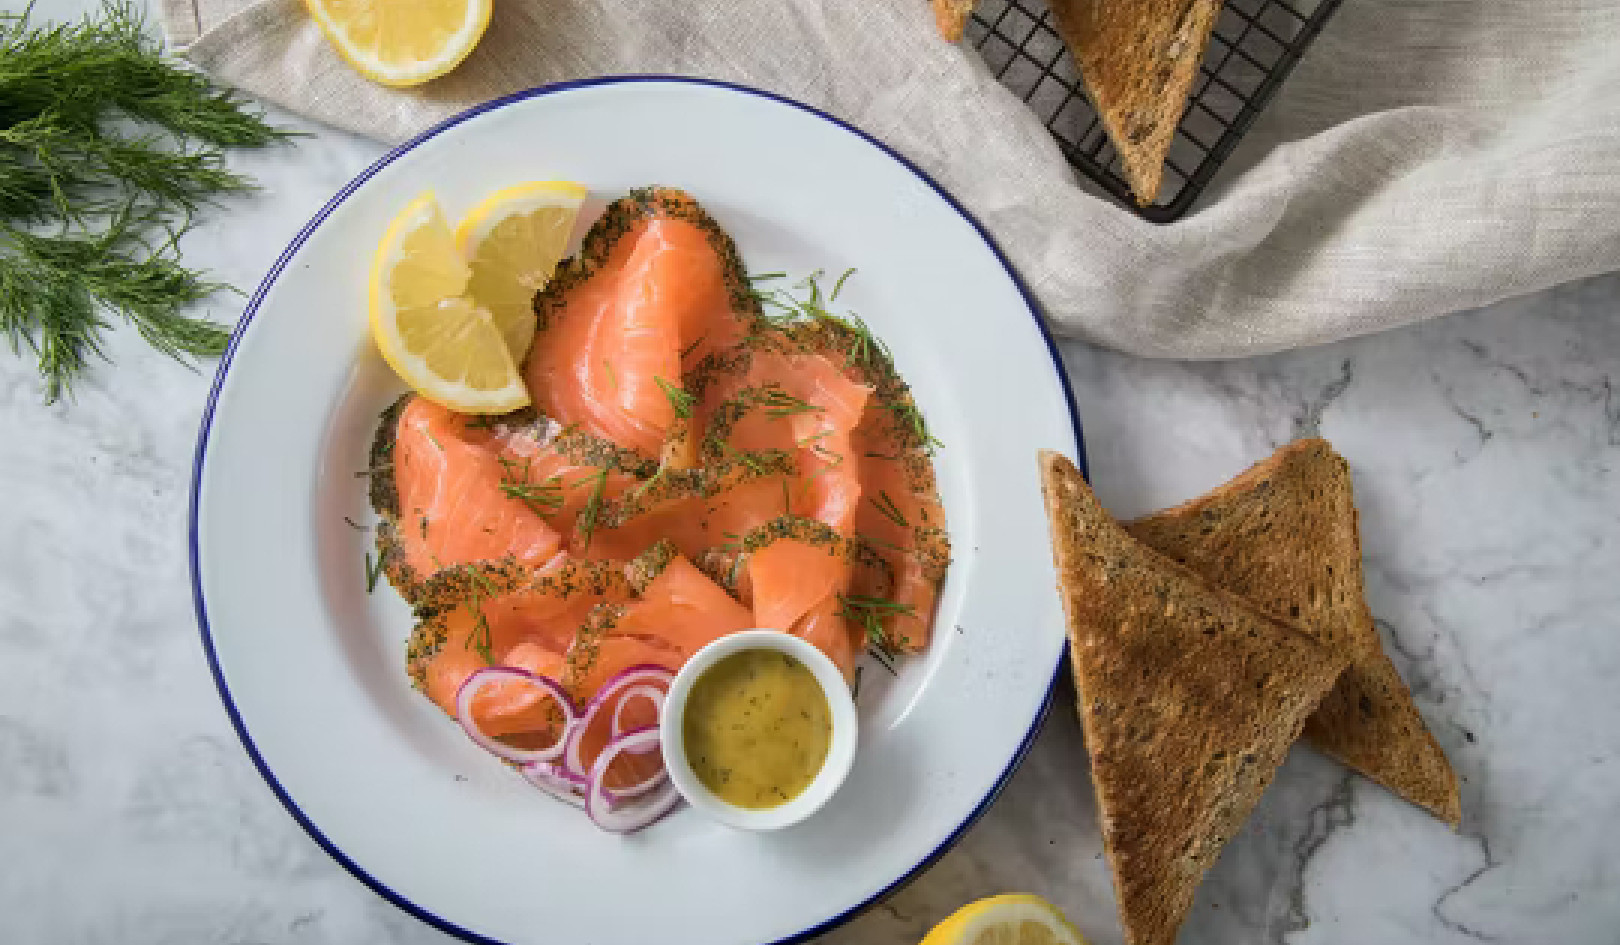 Does The Nordic Diet Rival Its Mediterranean Counterpart For Health Benefits?